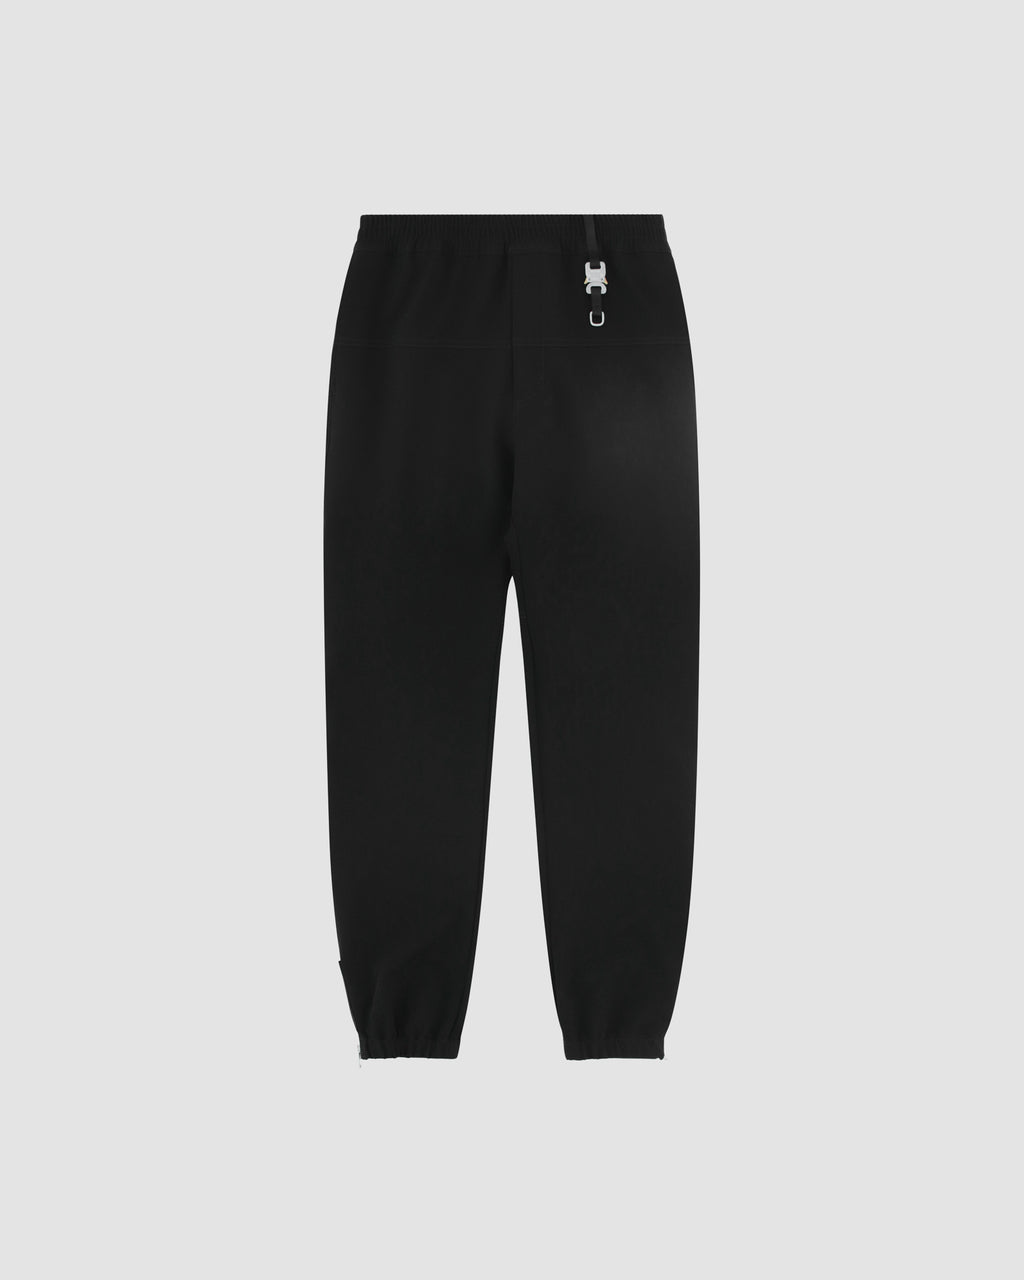 TRACKPANT - 2